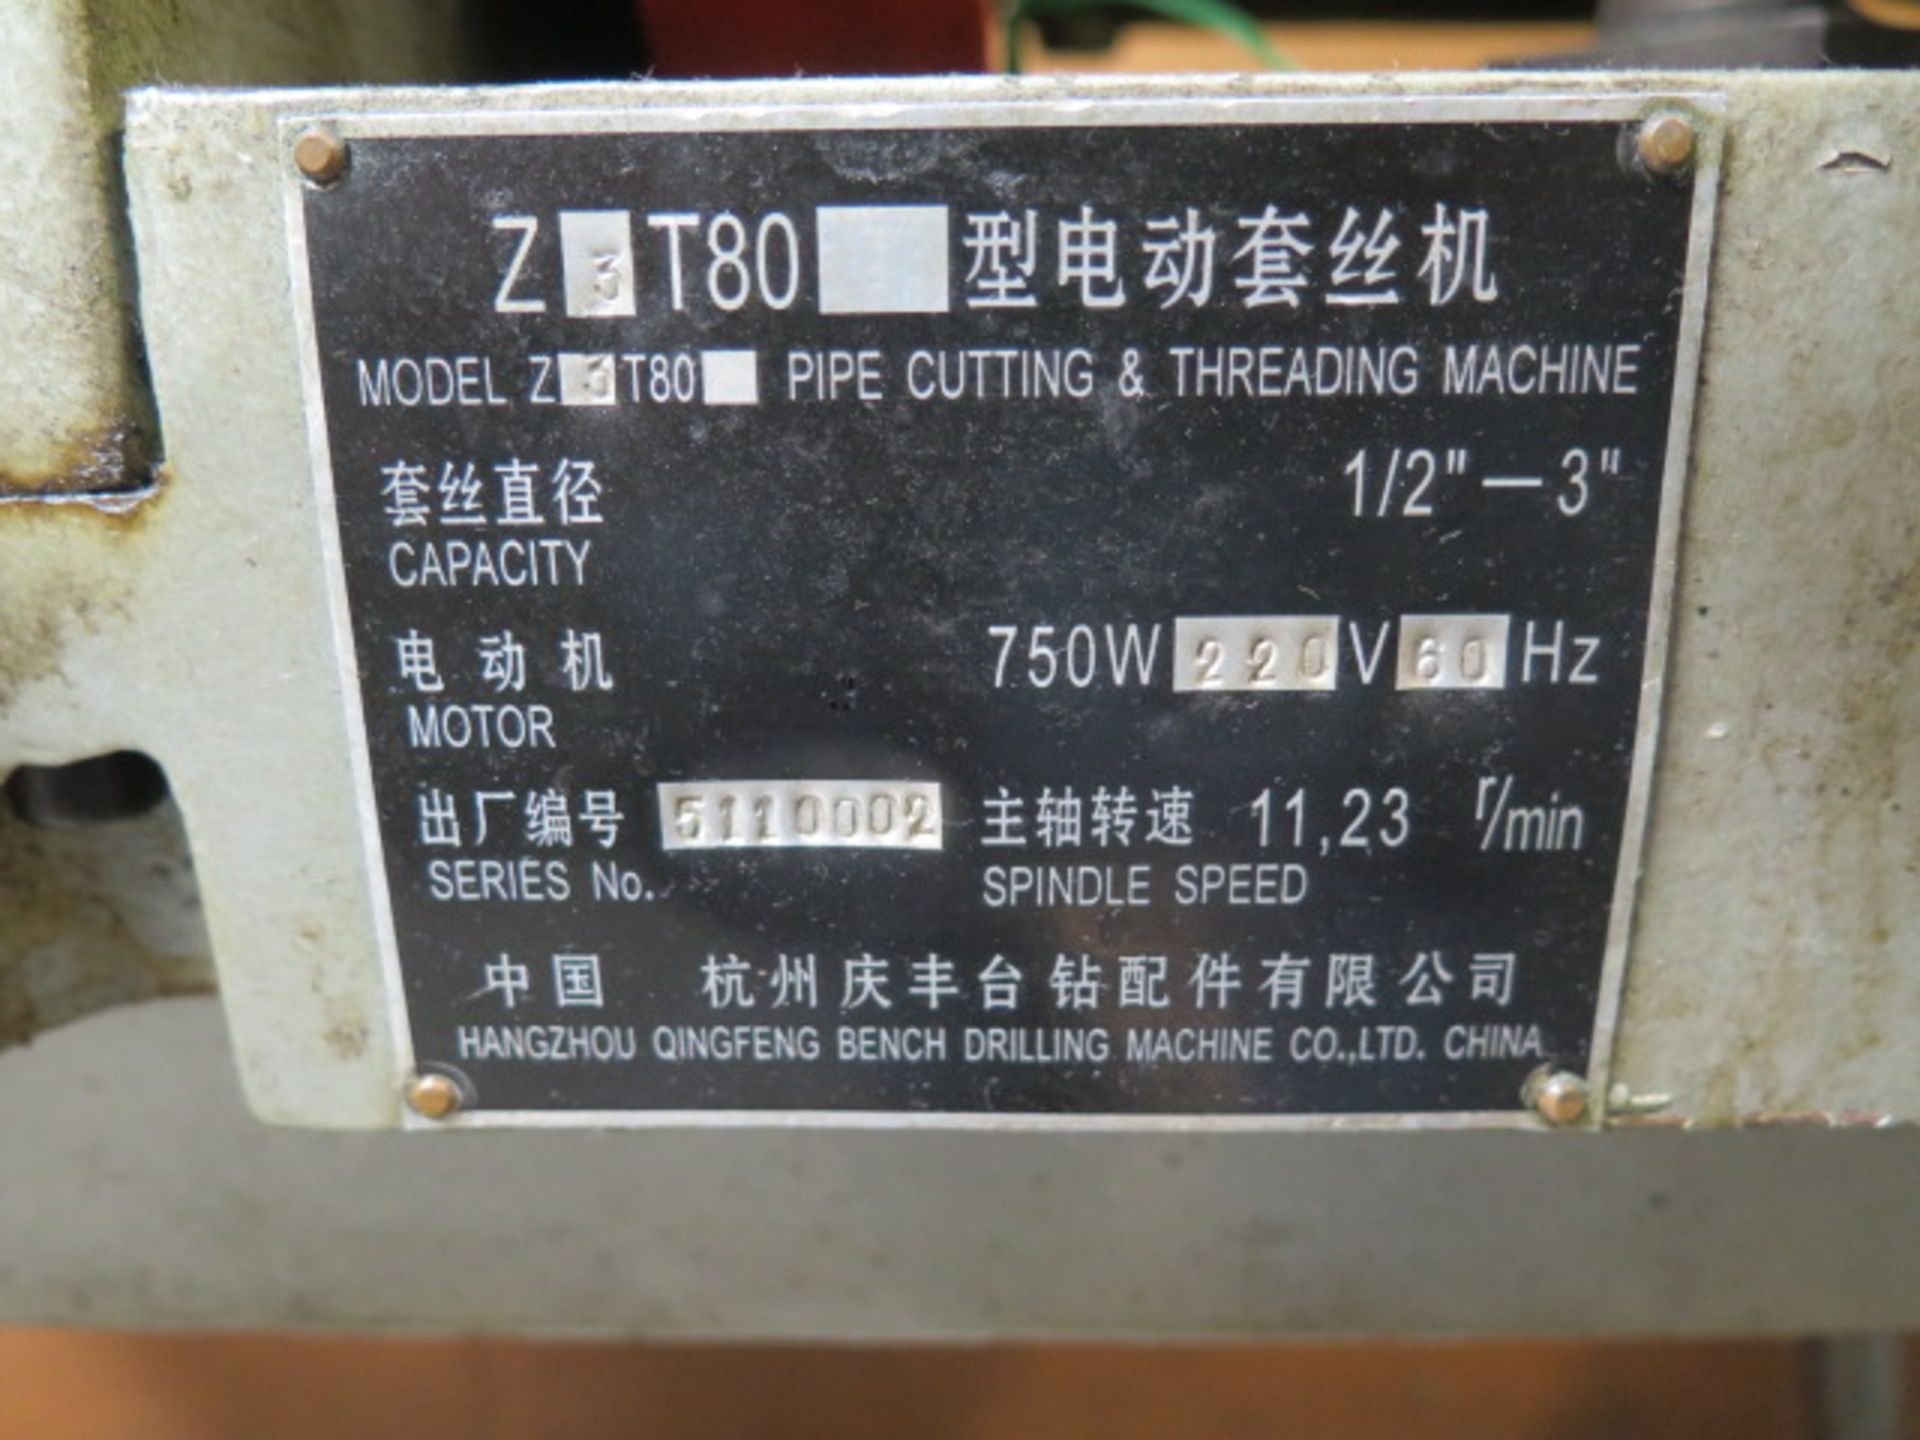 Hangzhau Z3T80 Pipe Cutting and Threading Machine s/n 5110002 (SOLD AS-IS – NO WARRANTY) - Image 9 of 9